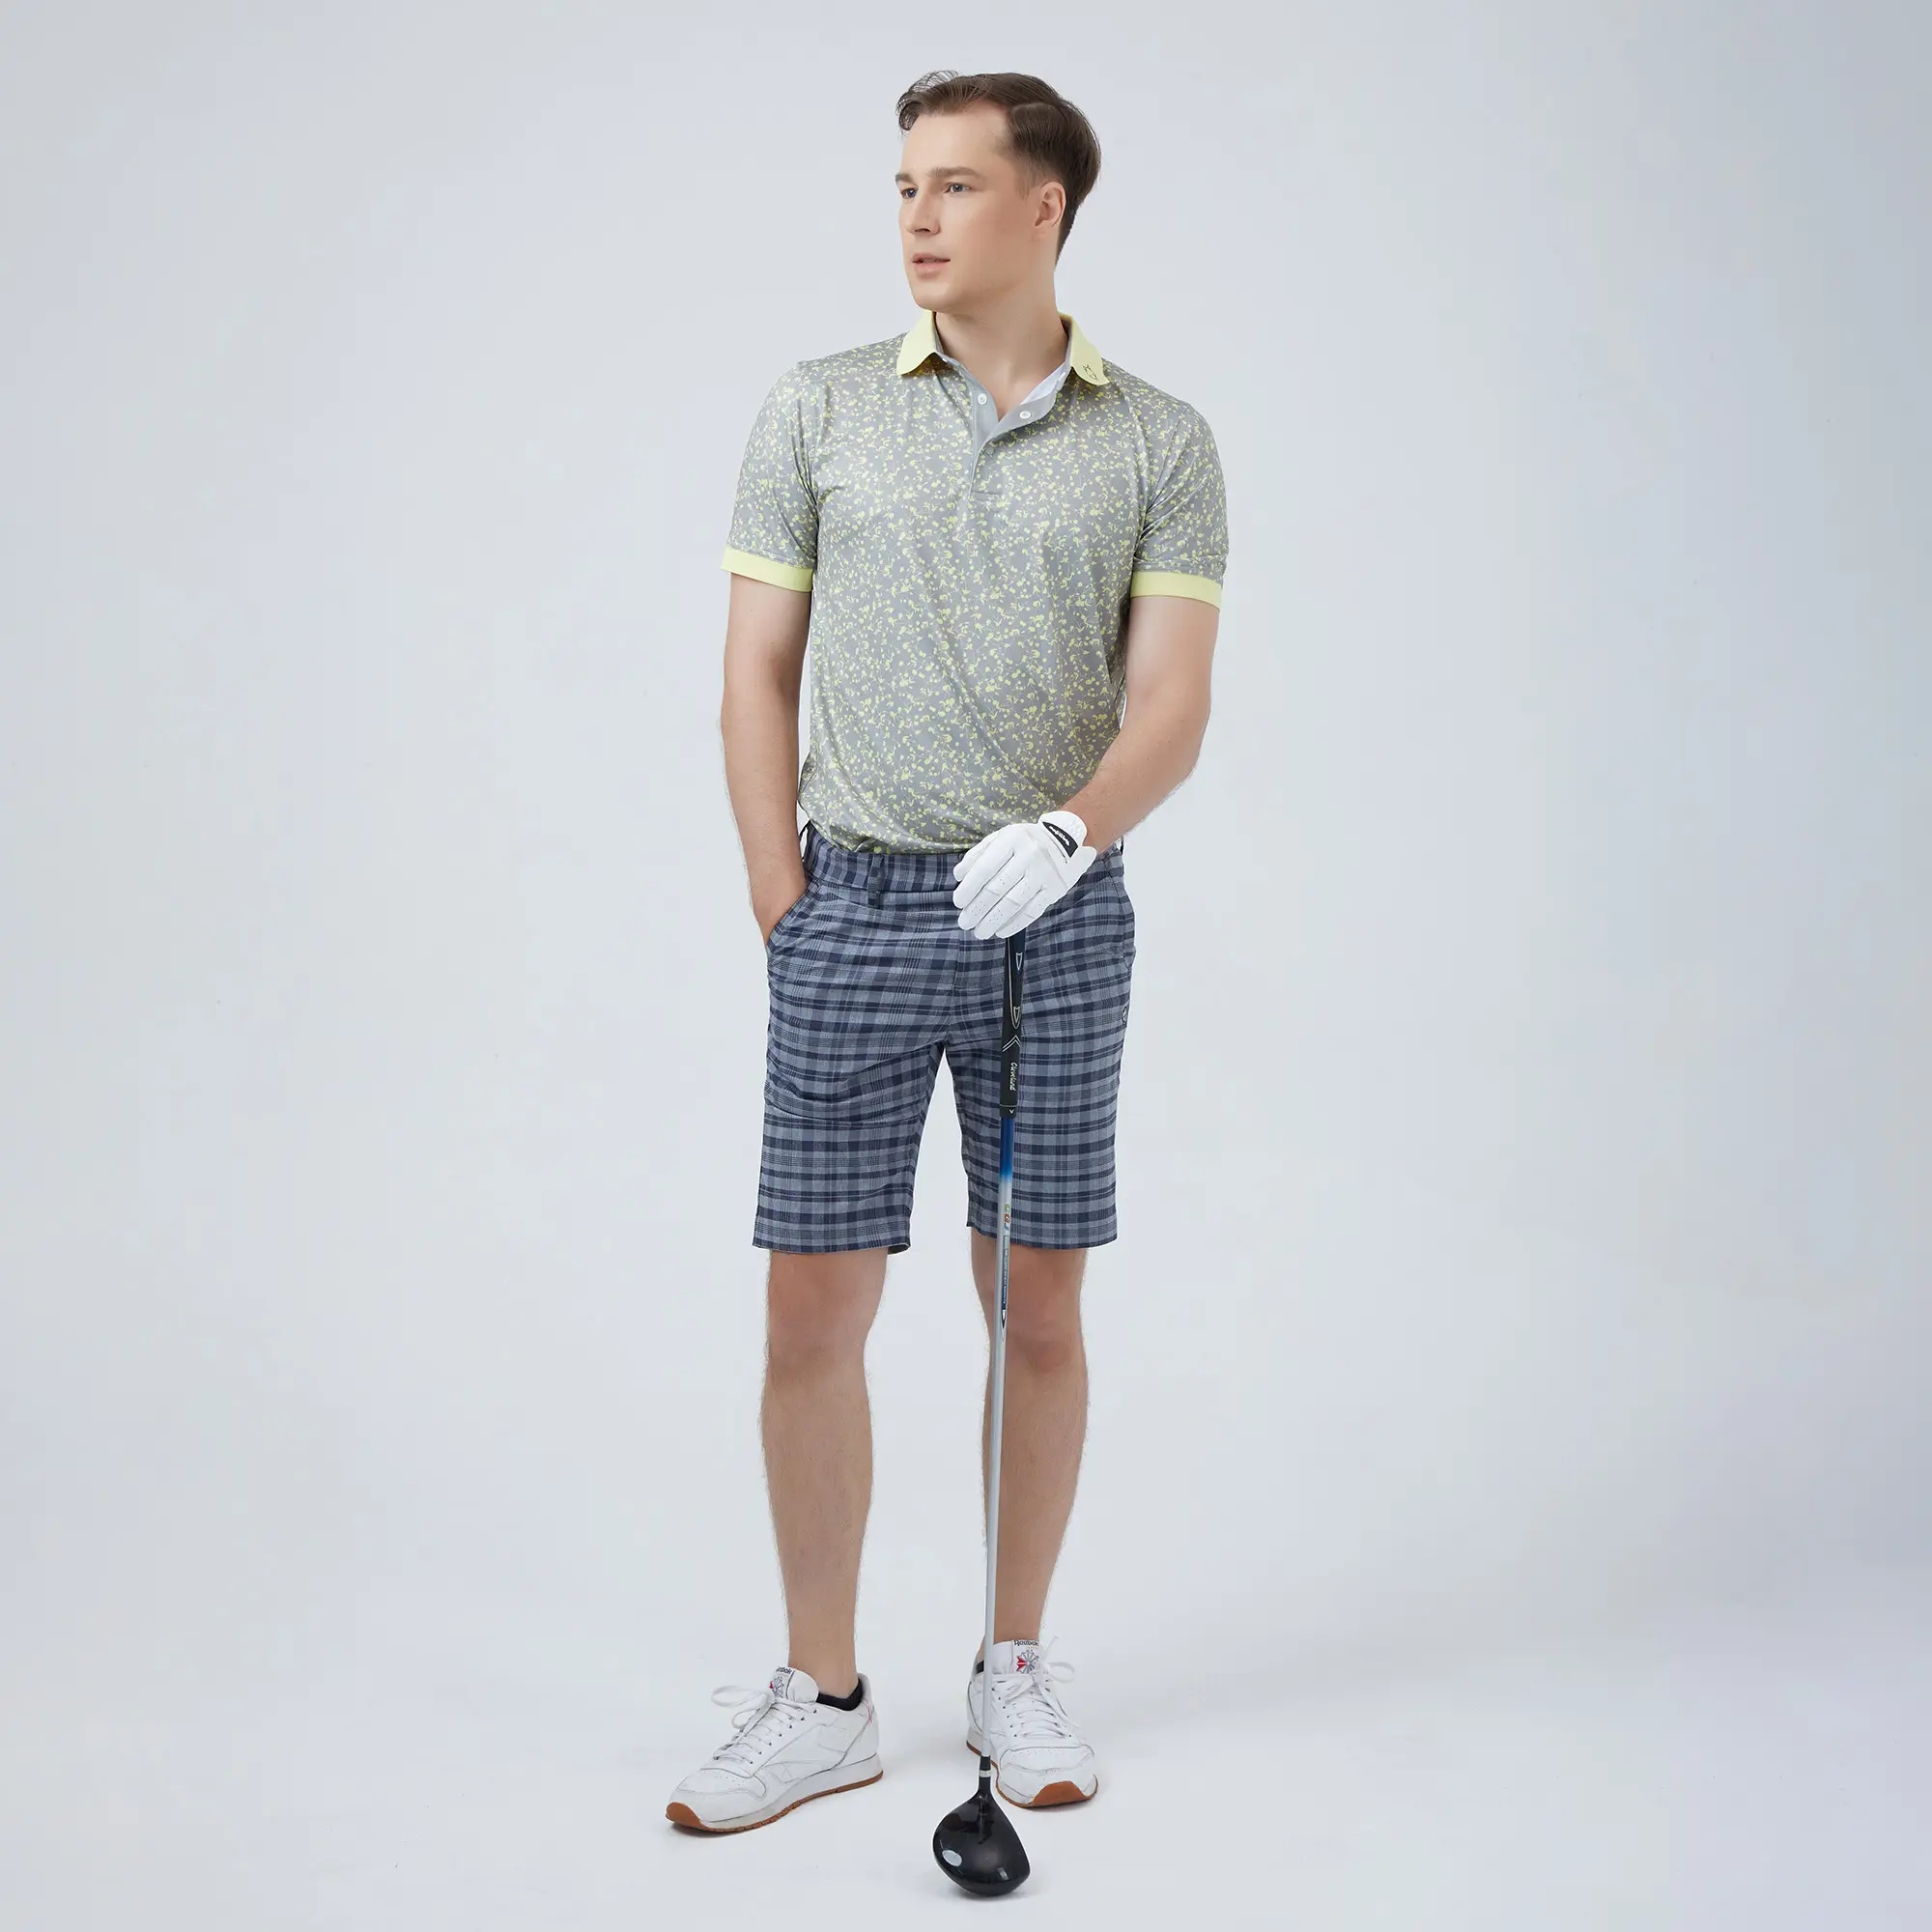 Custom Clothes Polyester Spandex Golf Polo for Men Popular Plus Size Golf Clothing with OEM Service Low MOQ Vietnam Manufacturer